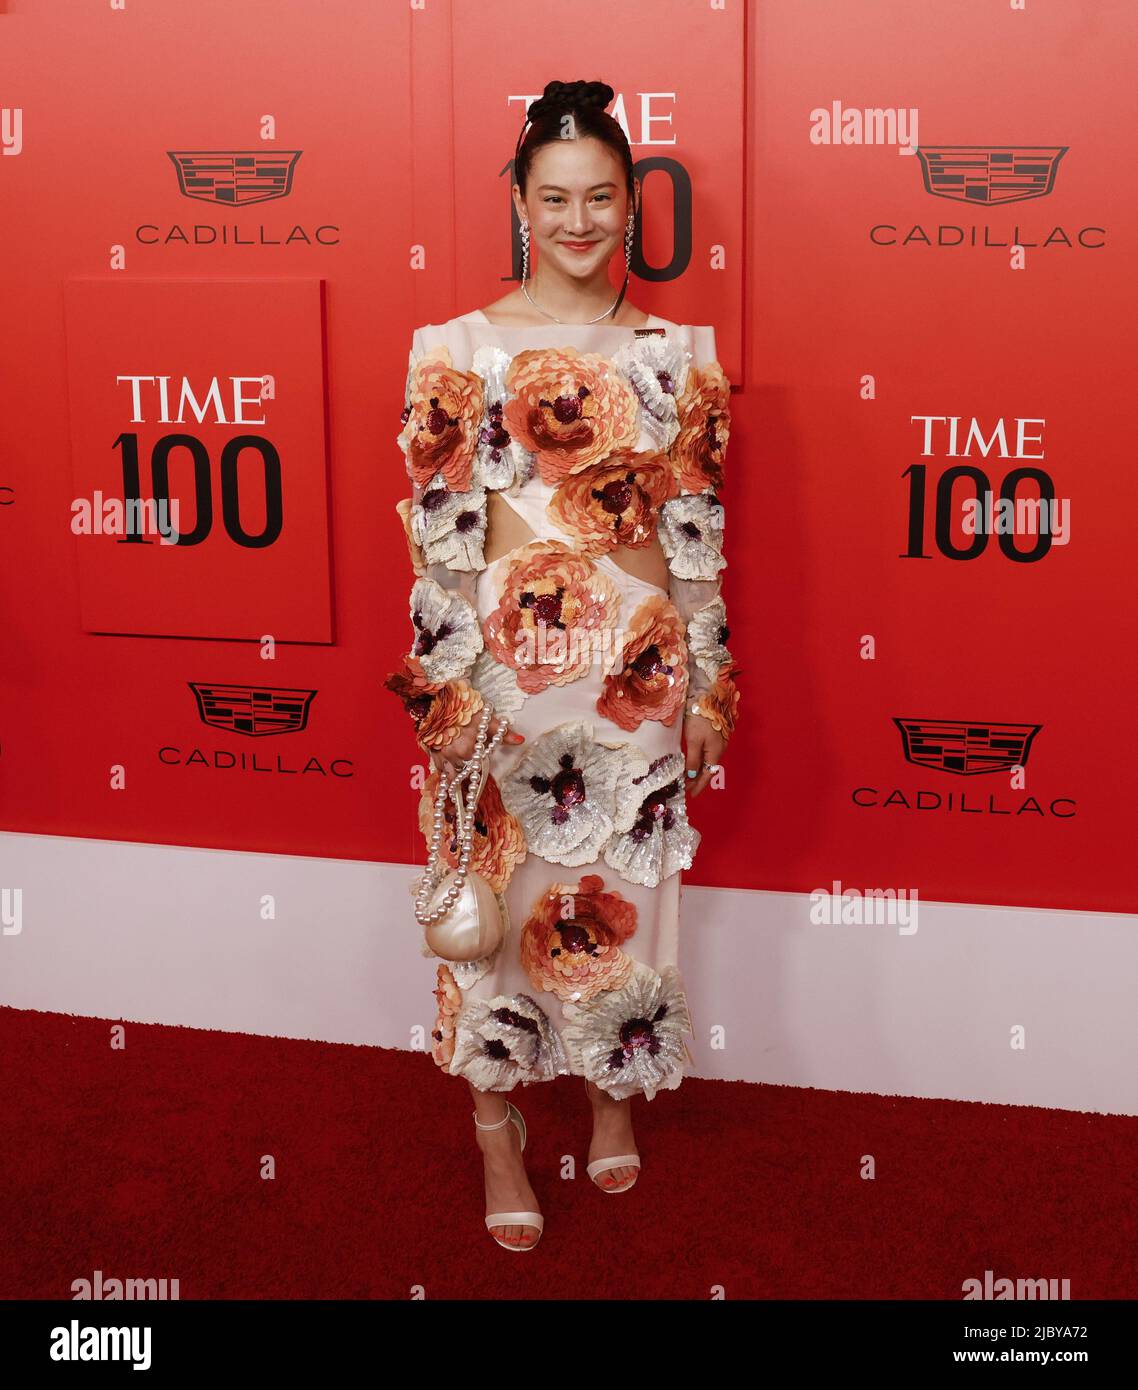 New York, United States. 08th June, 2022. Michelle Zauner arrives on the red carpet at the 2022 TIME100 Gala on Wednesday June 8, 2022 in New York City. Photo by John Angelillo/UPI Credit: UPI/Alamy Live News Stock Photo